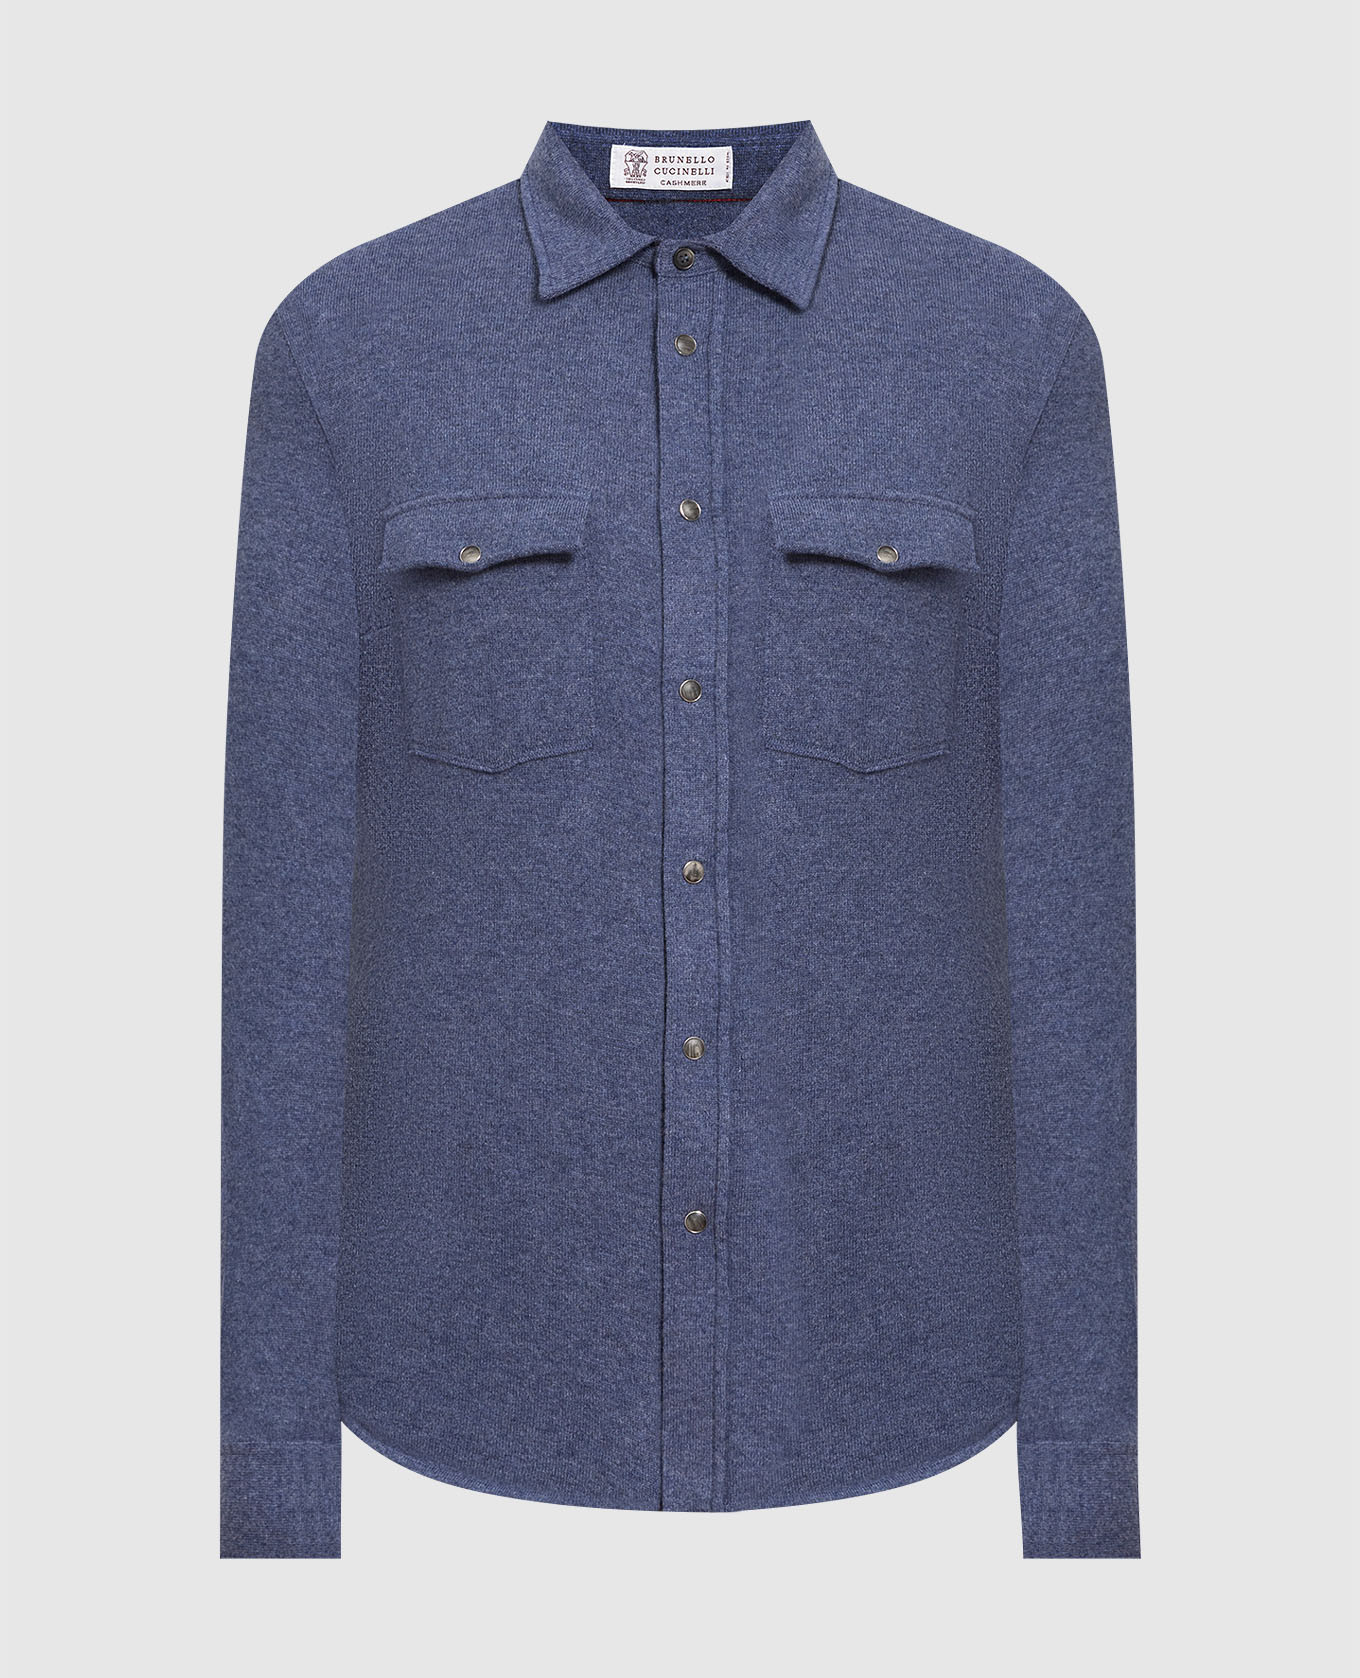 Blue shirt in wool, cashmere and silk